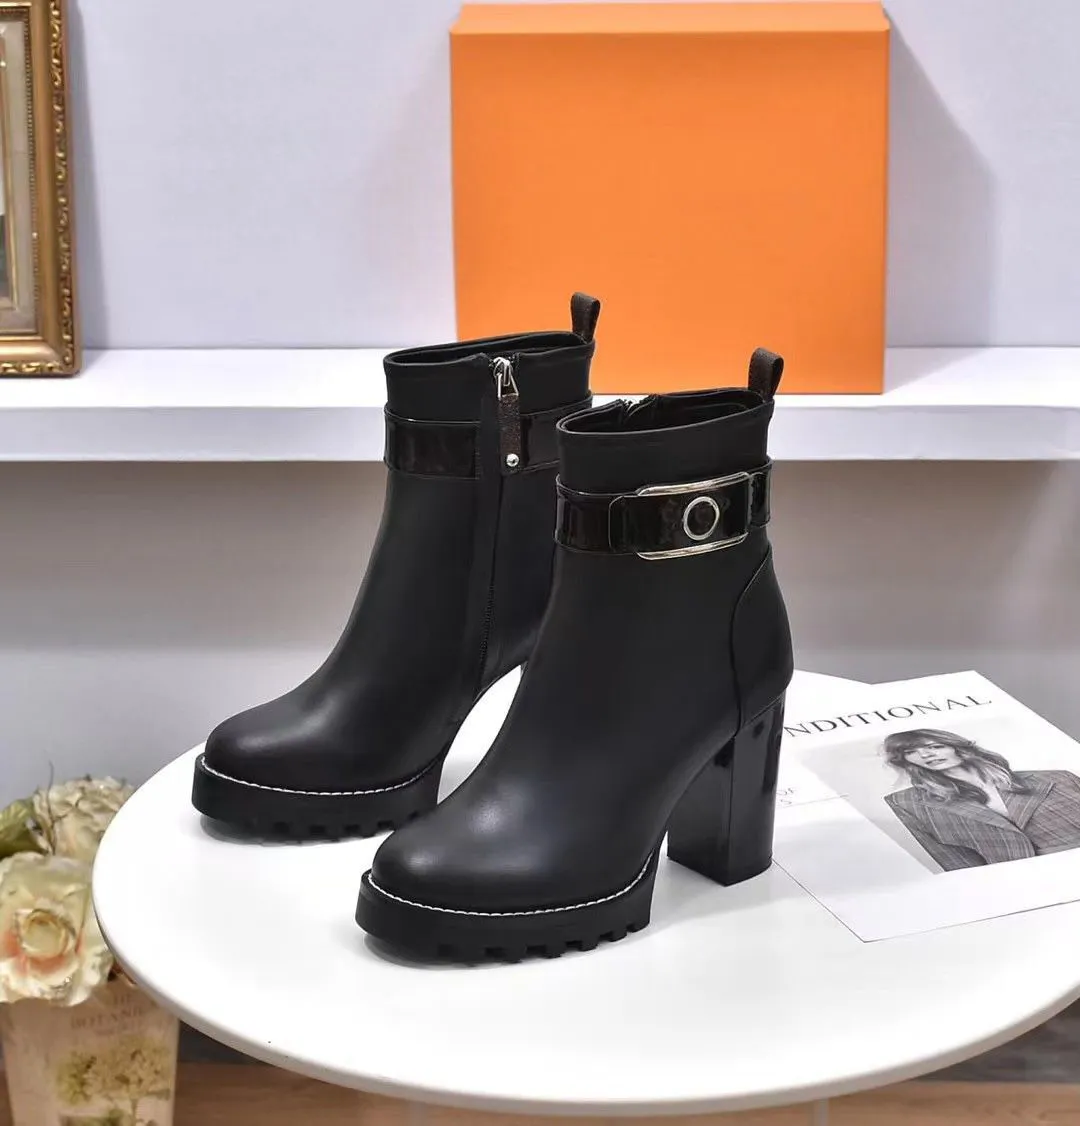 rivet boots woman cowhide zipper Metal belt buckle designer ankle boot 100% Leather lady High Heels fashion Autumn winter Thick heel women shoes size 35-40-42 With box